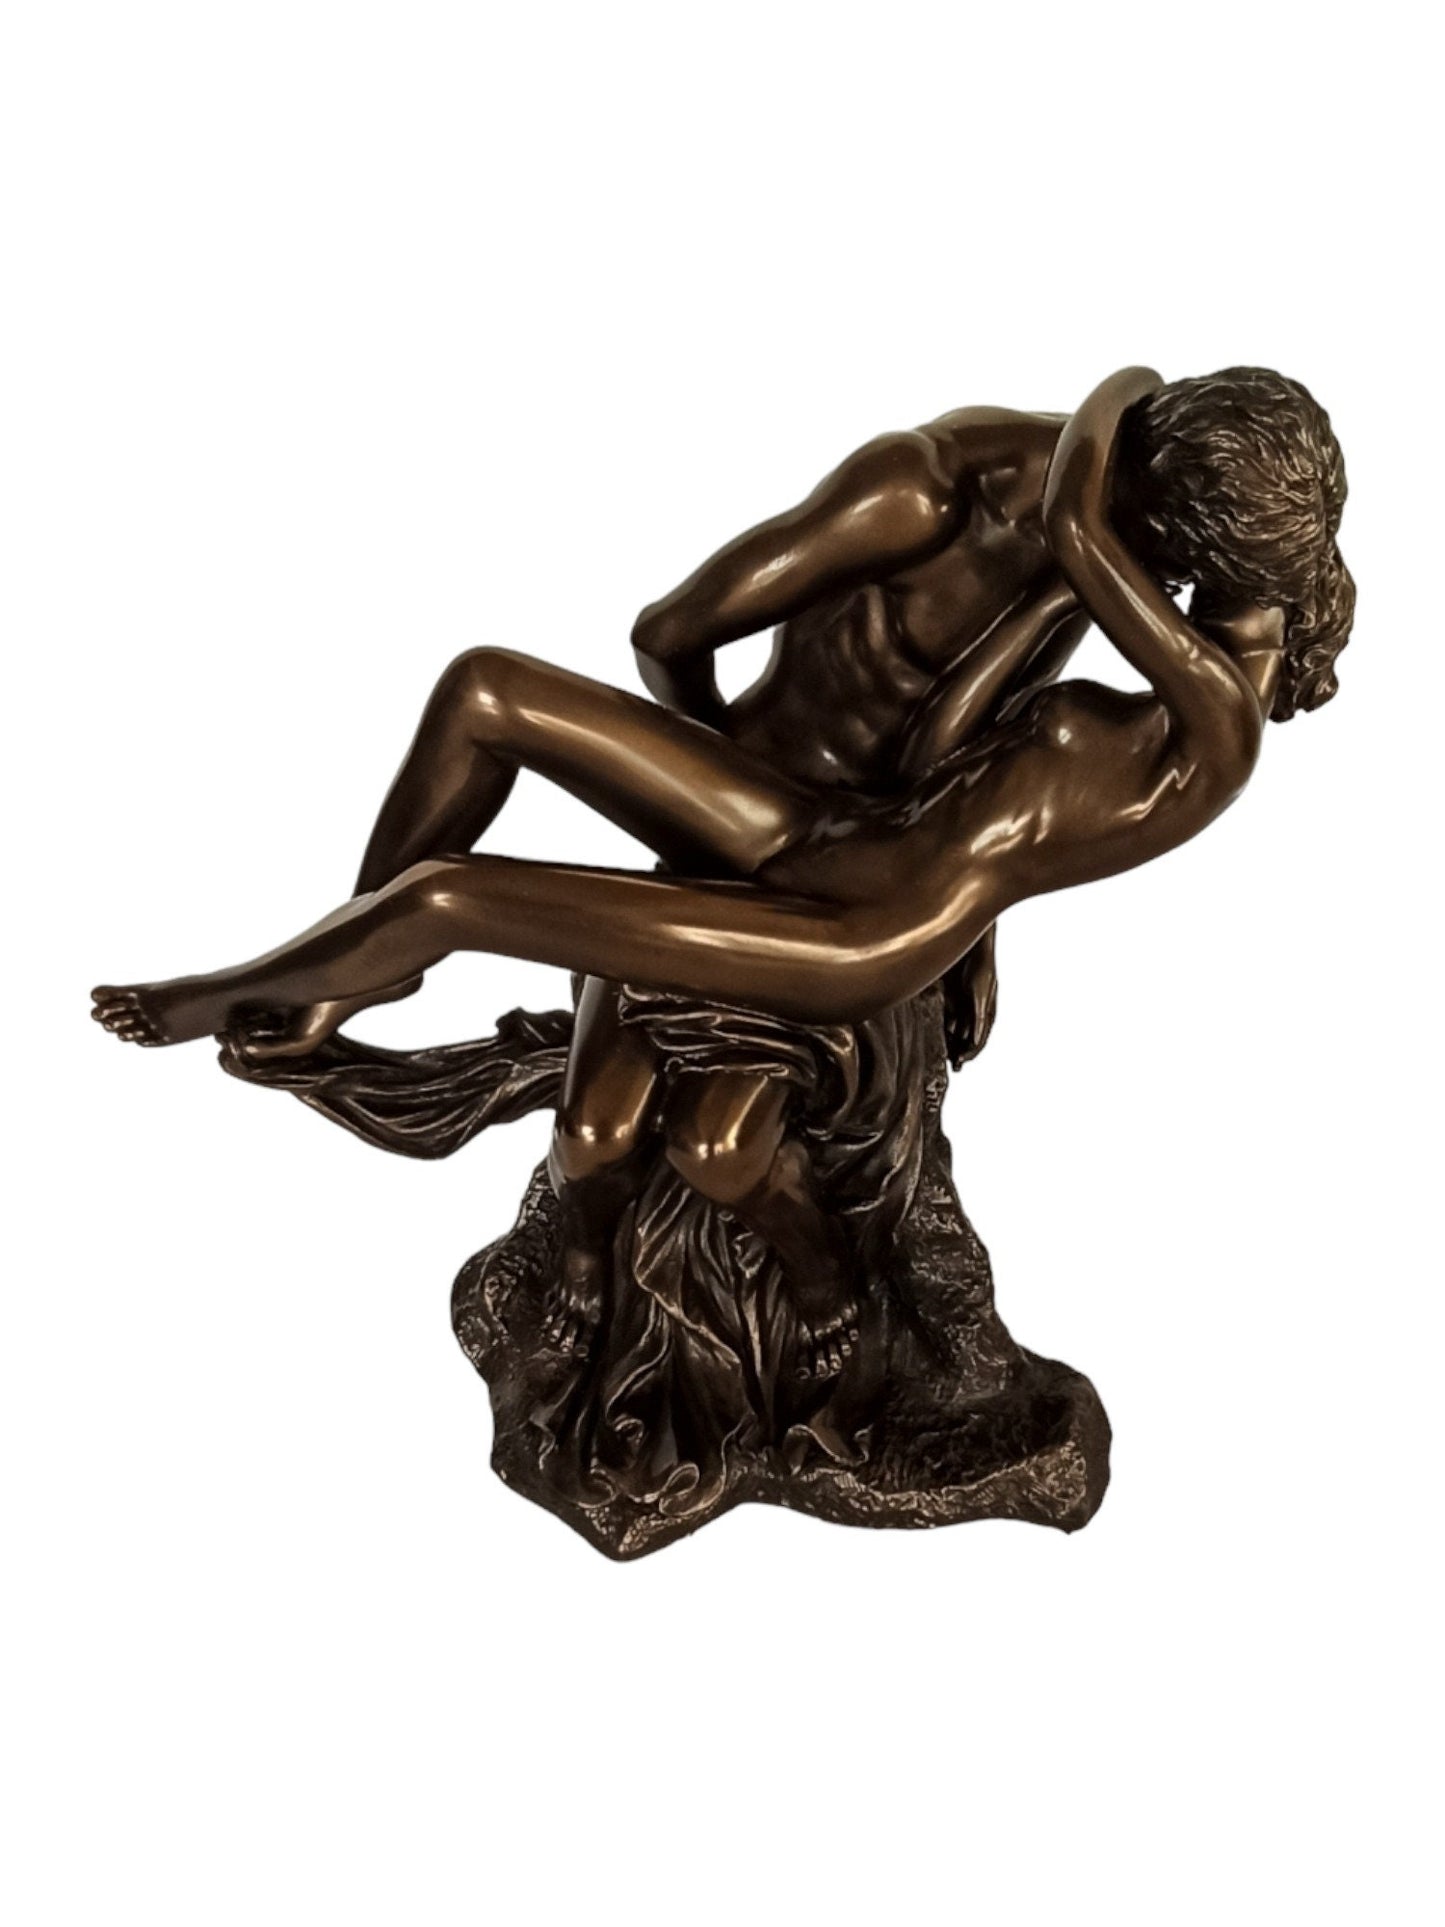 Couple Kissing - The ultimate expression of Love - Indicates Affection and Intimacy between two people - Cold Cast Bronze Resin